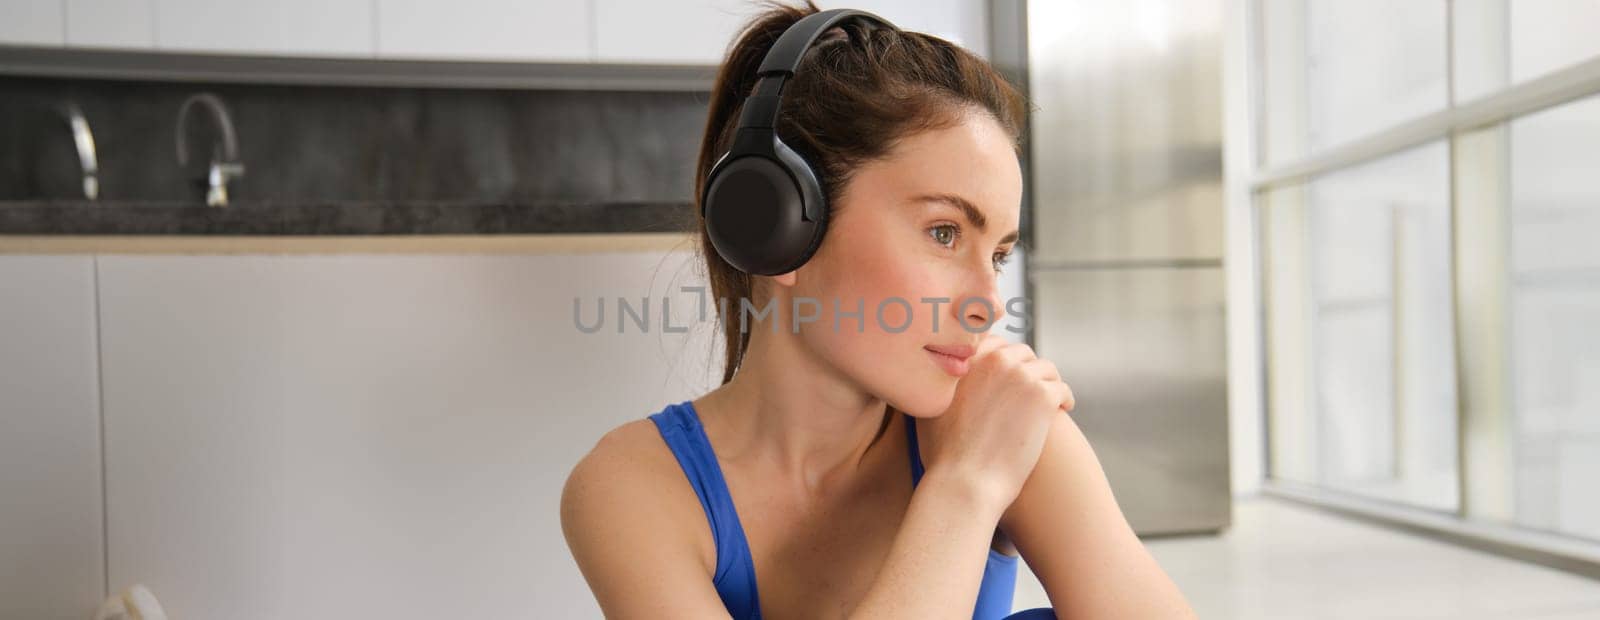 Close up portrait of beautiful brunette woman, wearing headphones, listening to music and working out, smiling and looking aside thoughtful. Wellbeing and lifestyle concept